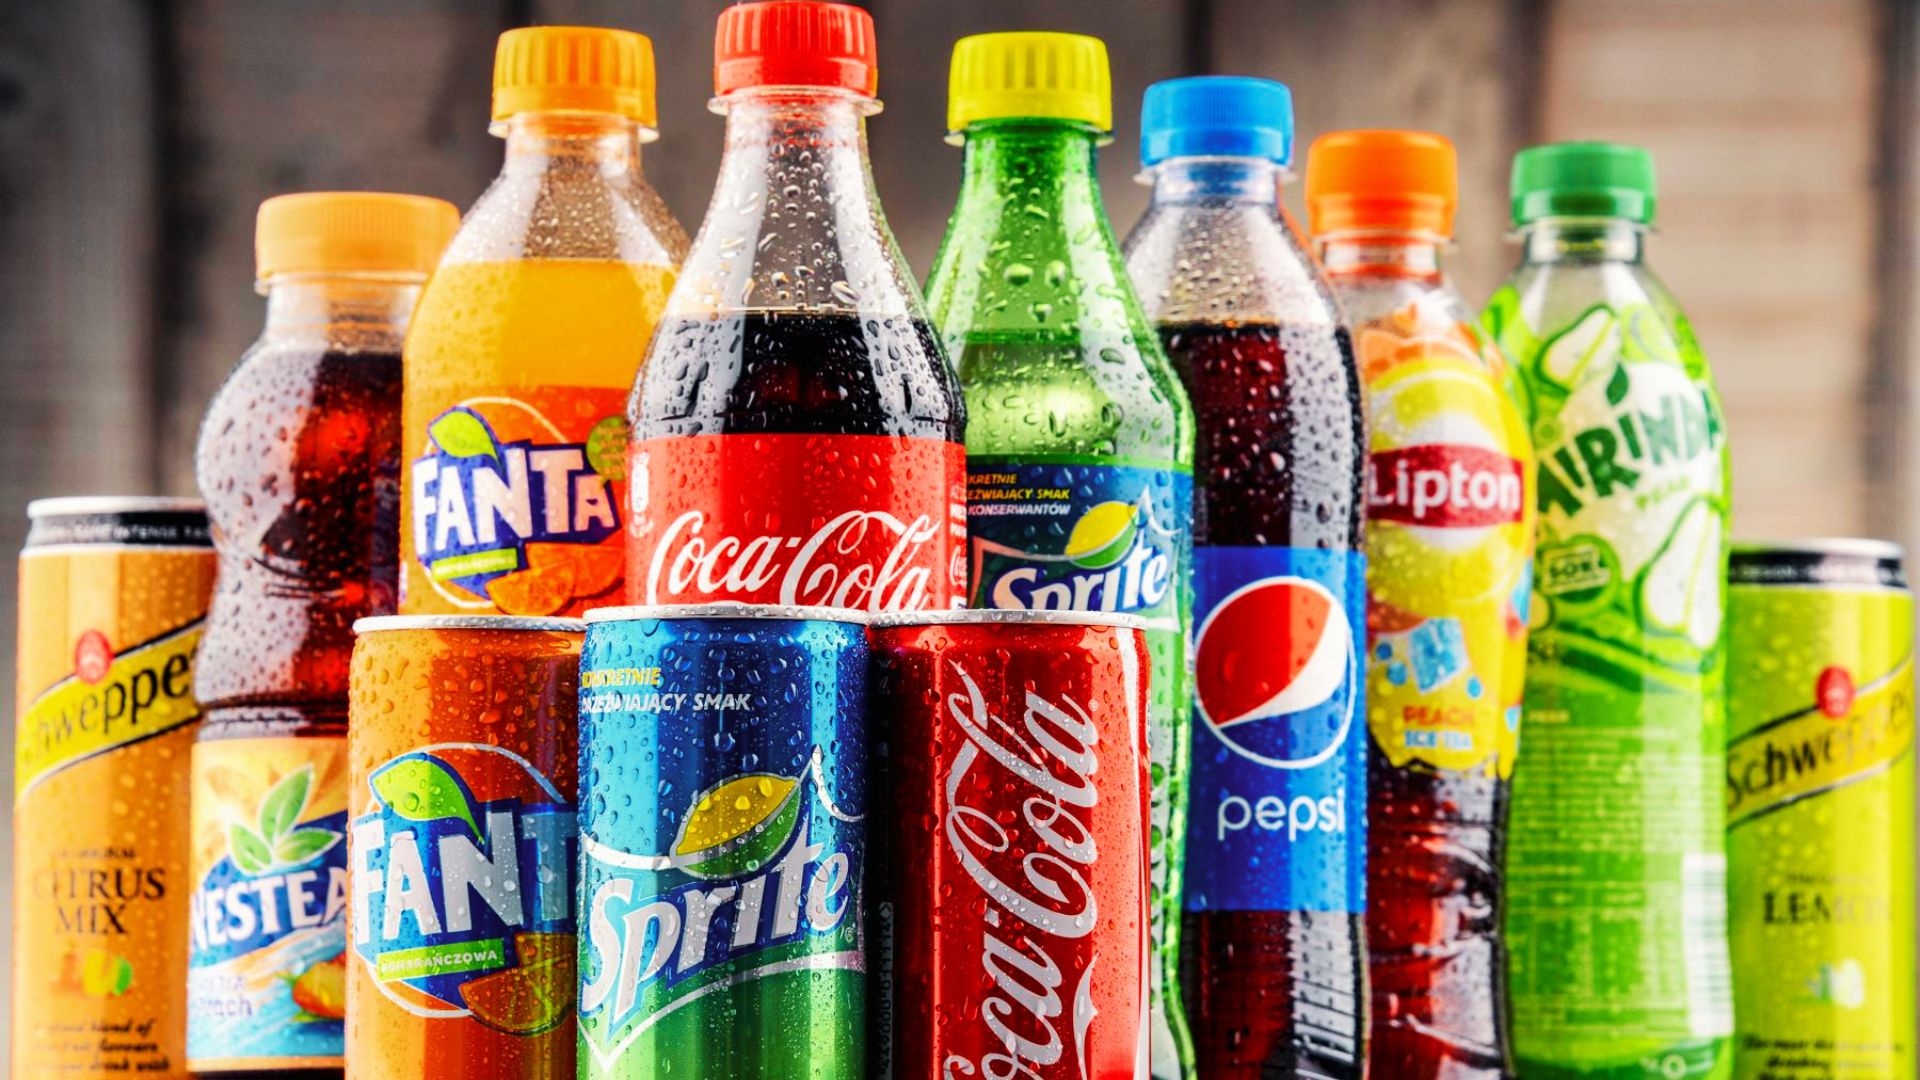 Best Soft Drinks In India - Price, Flavors & More